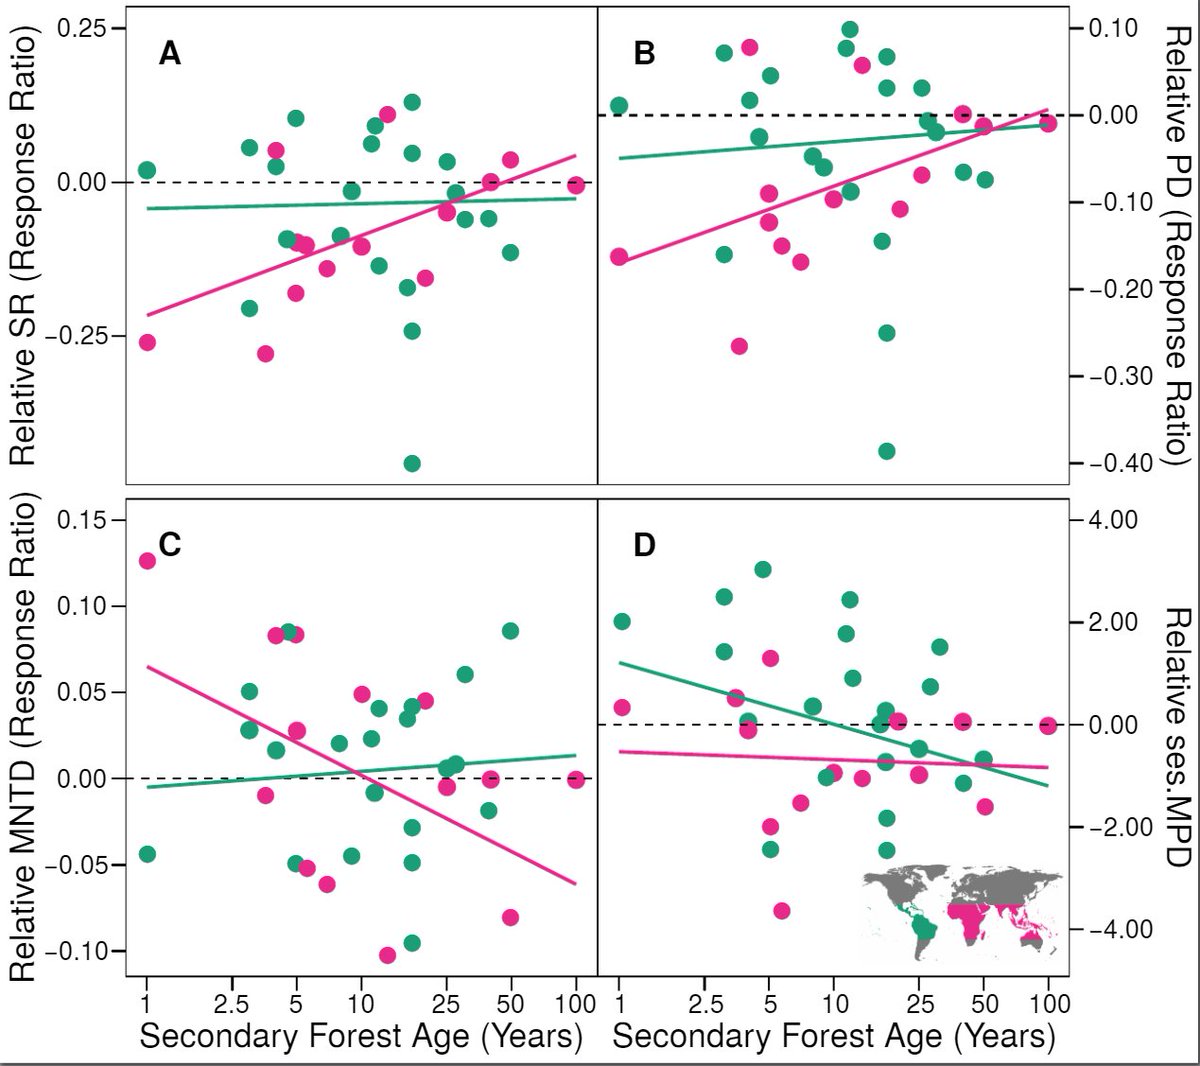 In the Old World, species richness & phylogenetic diversity increased as secondary forest aged reaching equivalence to primary forest after ~45 years & ~84 years respectively. Secondary forest age did not effect species richness or phylogenetic diversity in New World sites. (5/8)